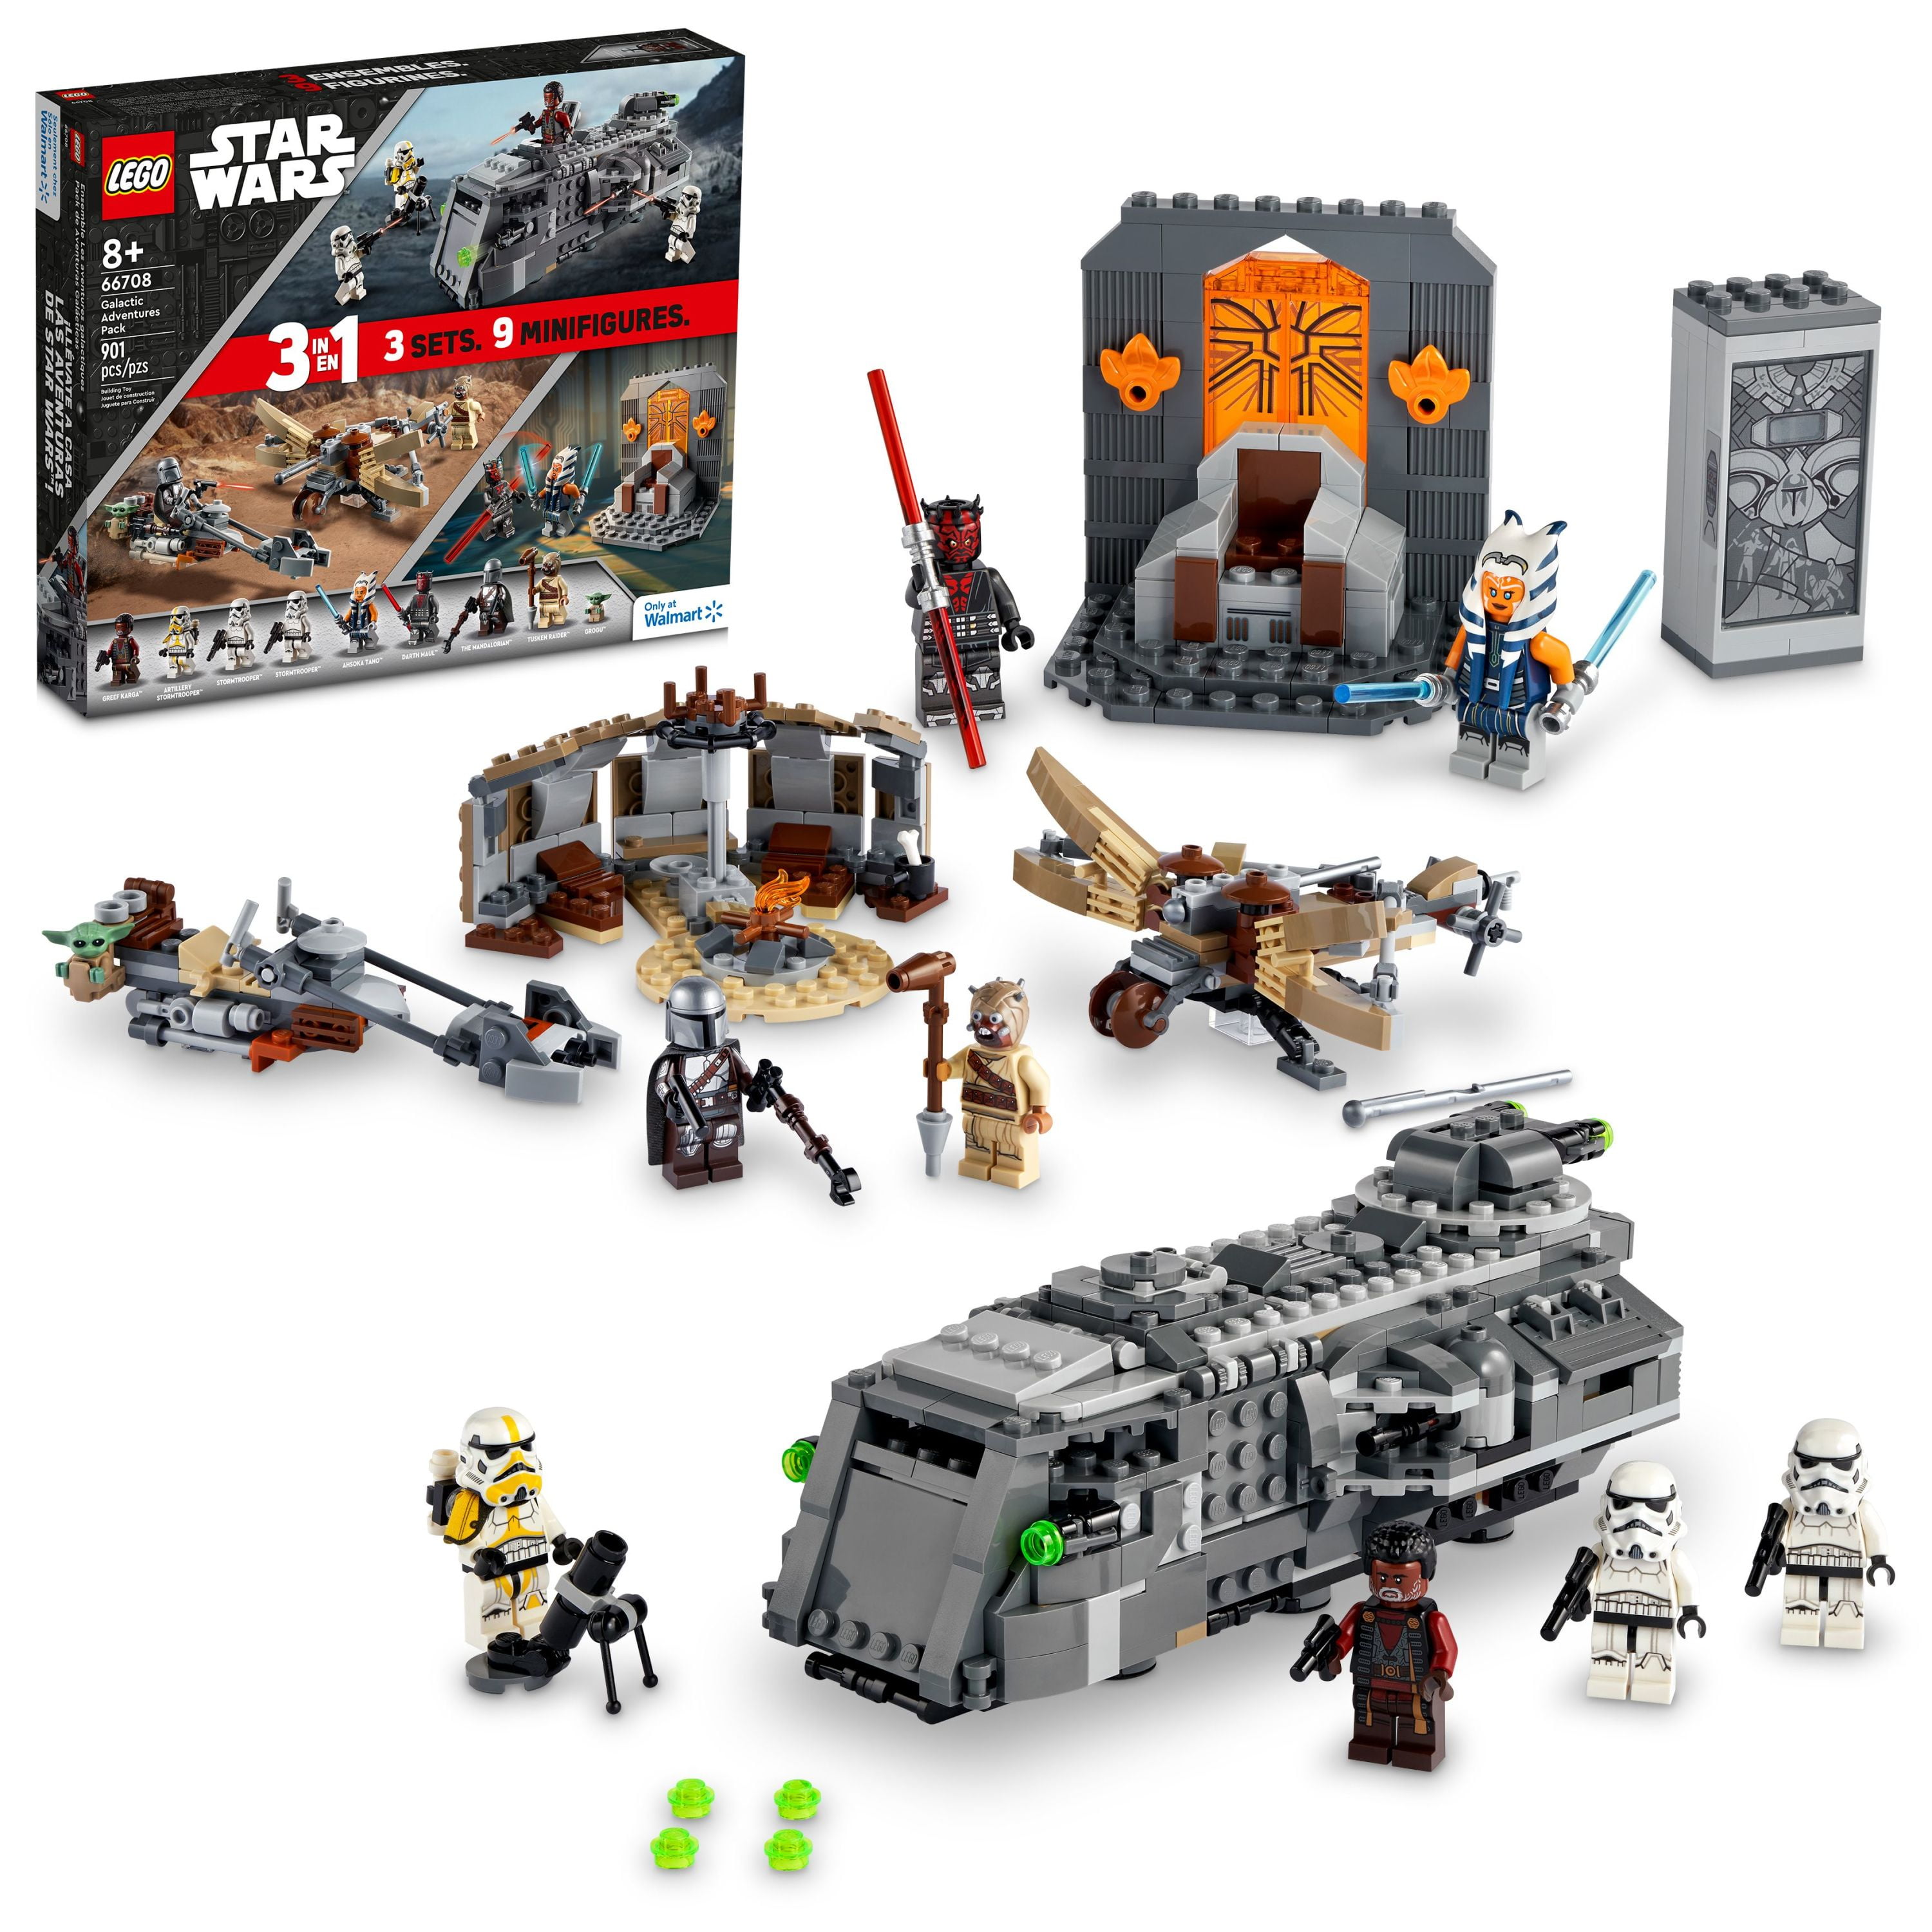 Lure klap form LEGO Star Wars Galactic Adventures Pack 66708 3-in-1 Building Toy Gift Set  (901 pieces) - Walmart.com